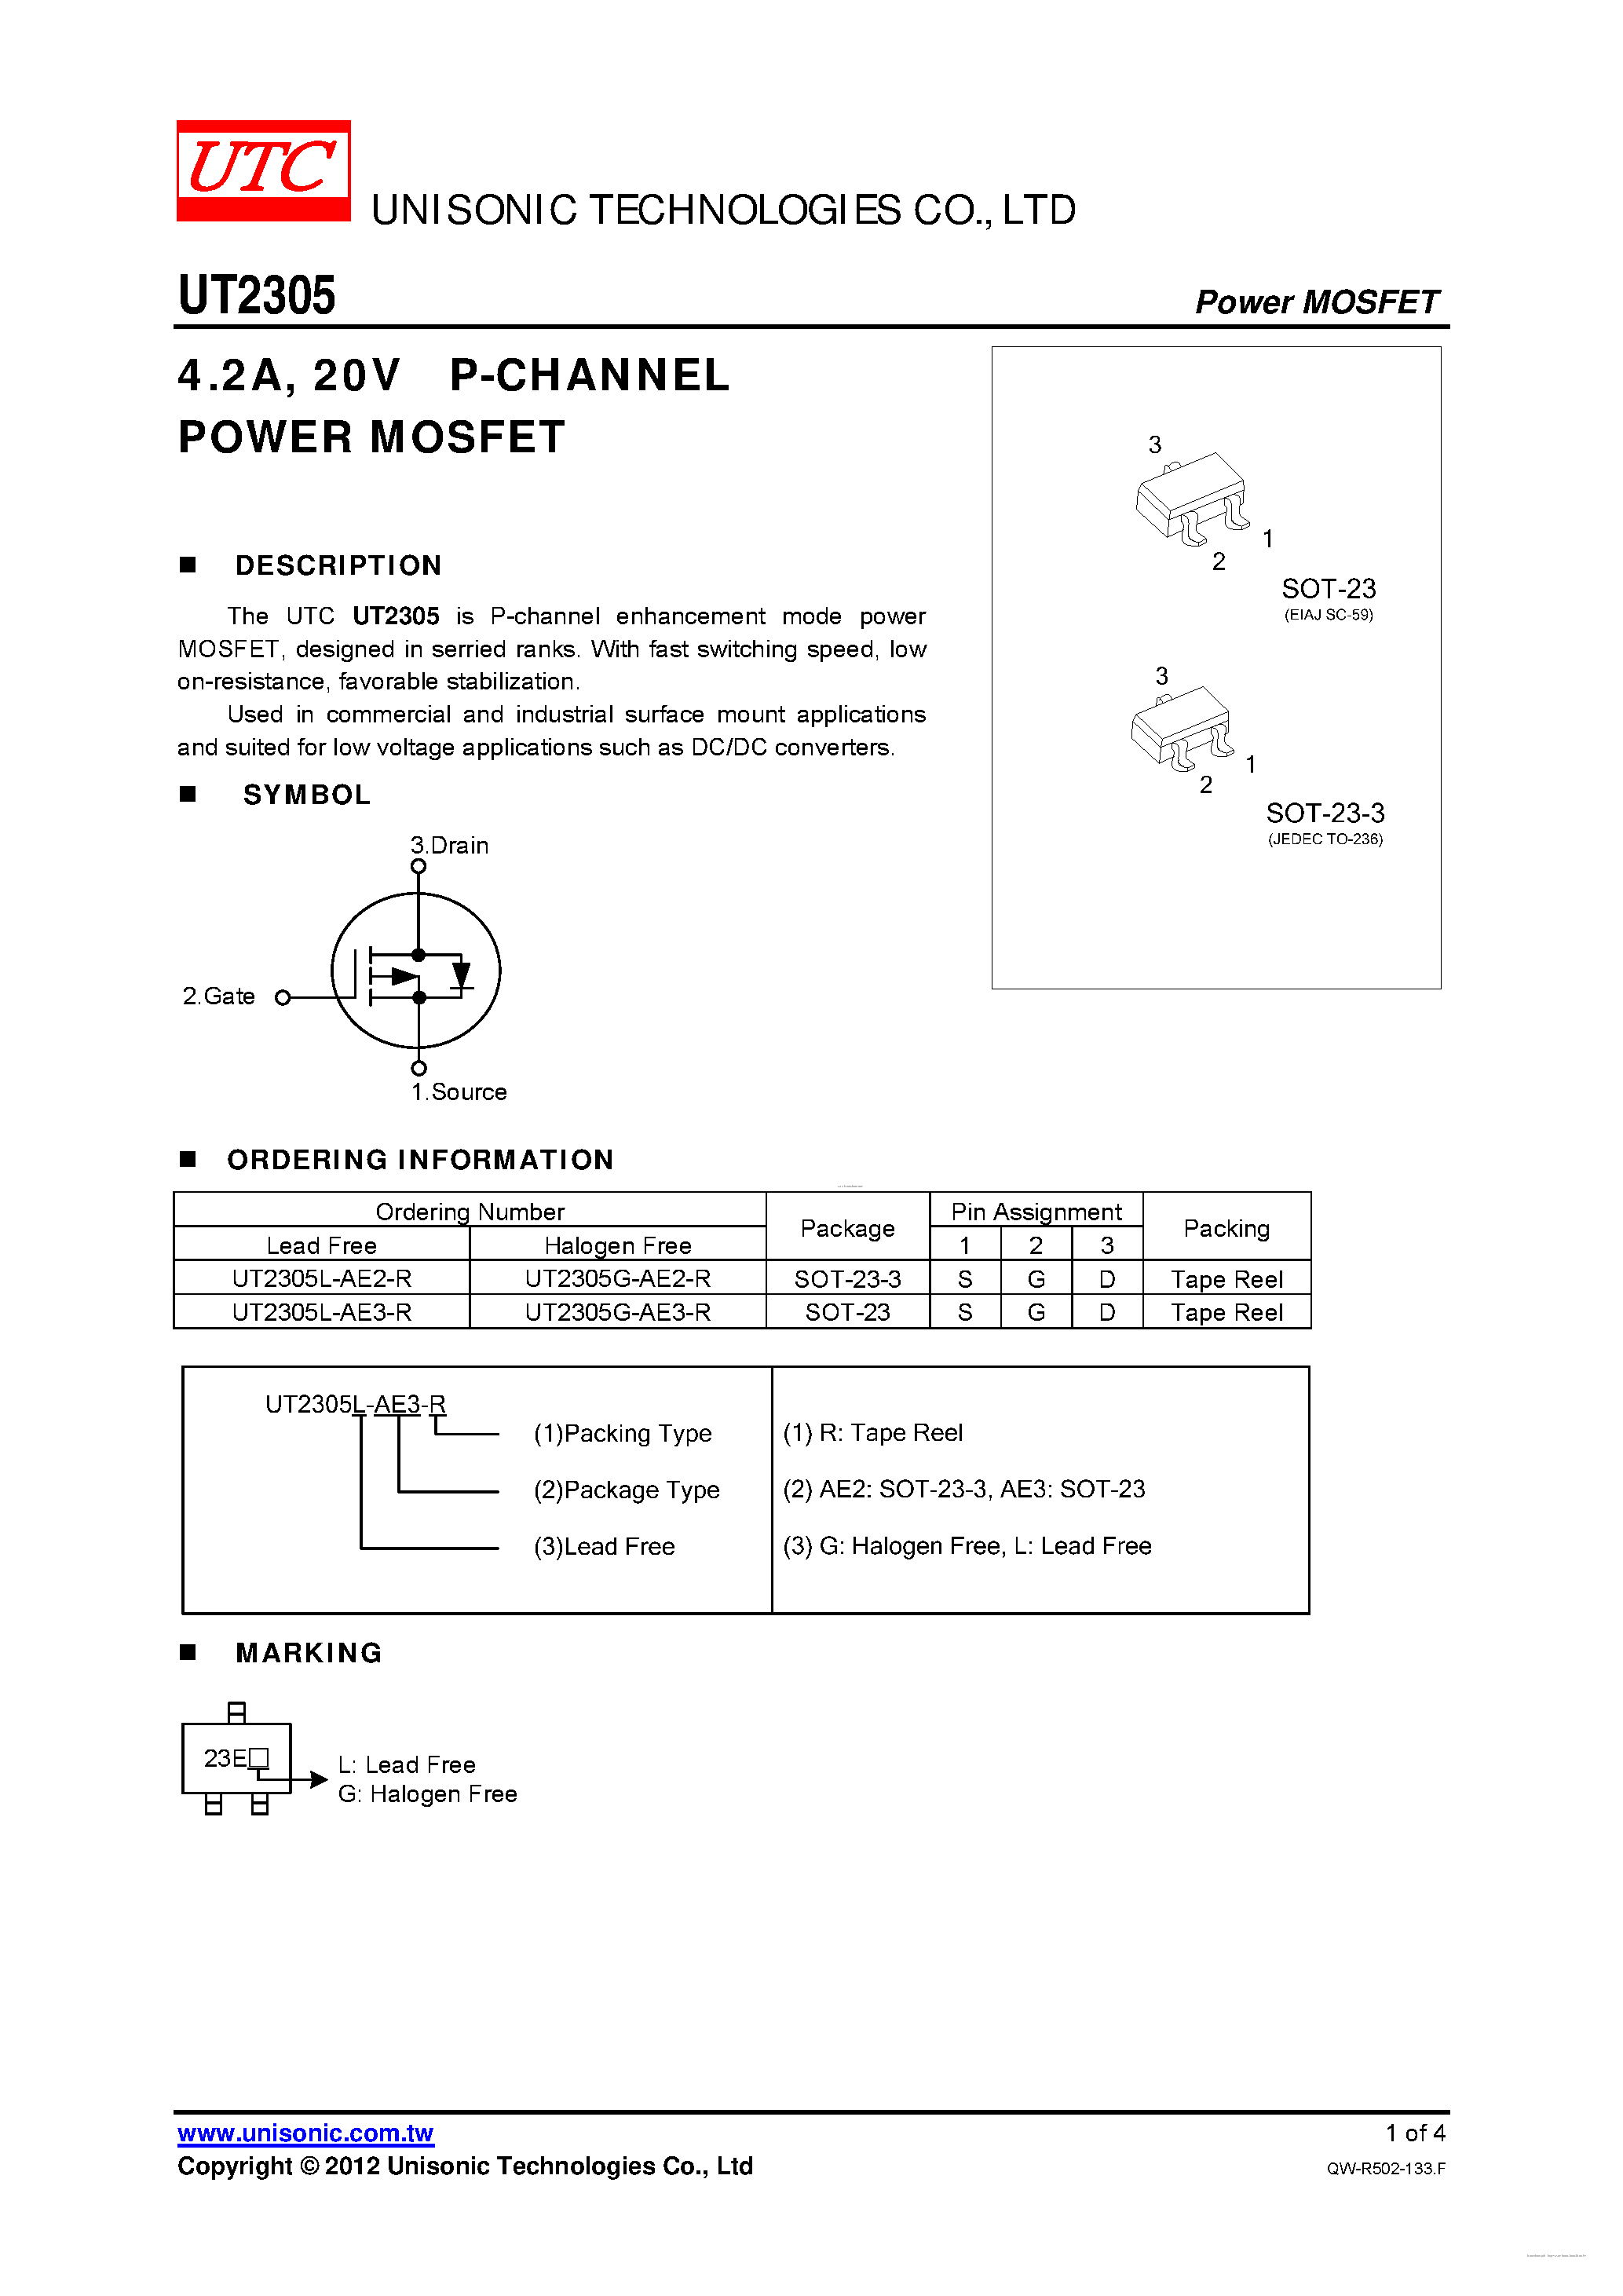 Datasheet UT2305 - 20V P-CHANNEL POWER MOSFET page 1